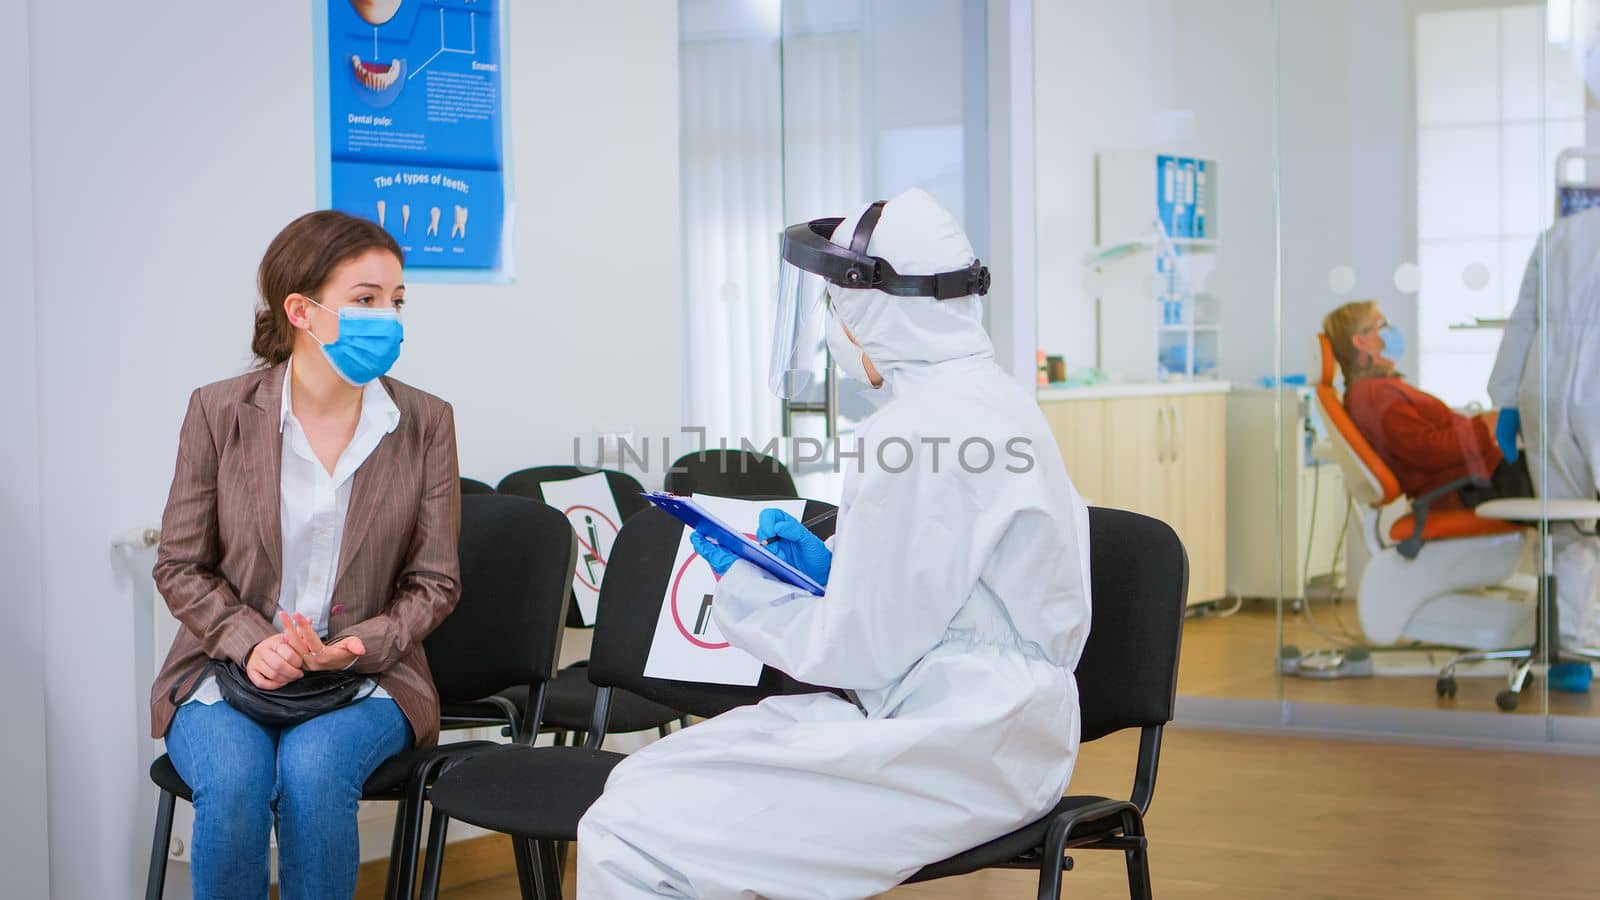 Stomatologist in protective suit reviewing registration form with patient by DCStudio